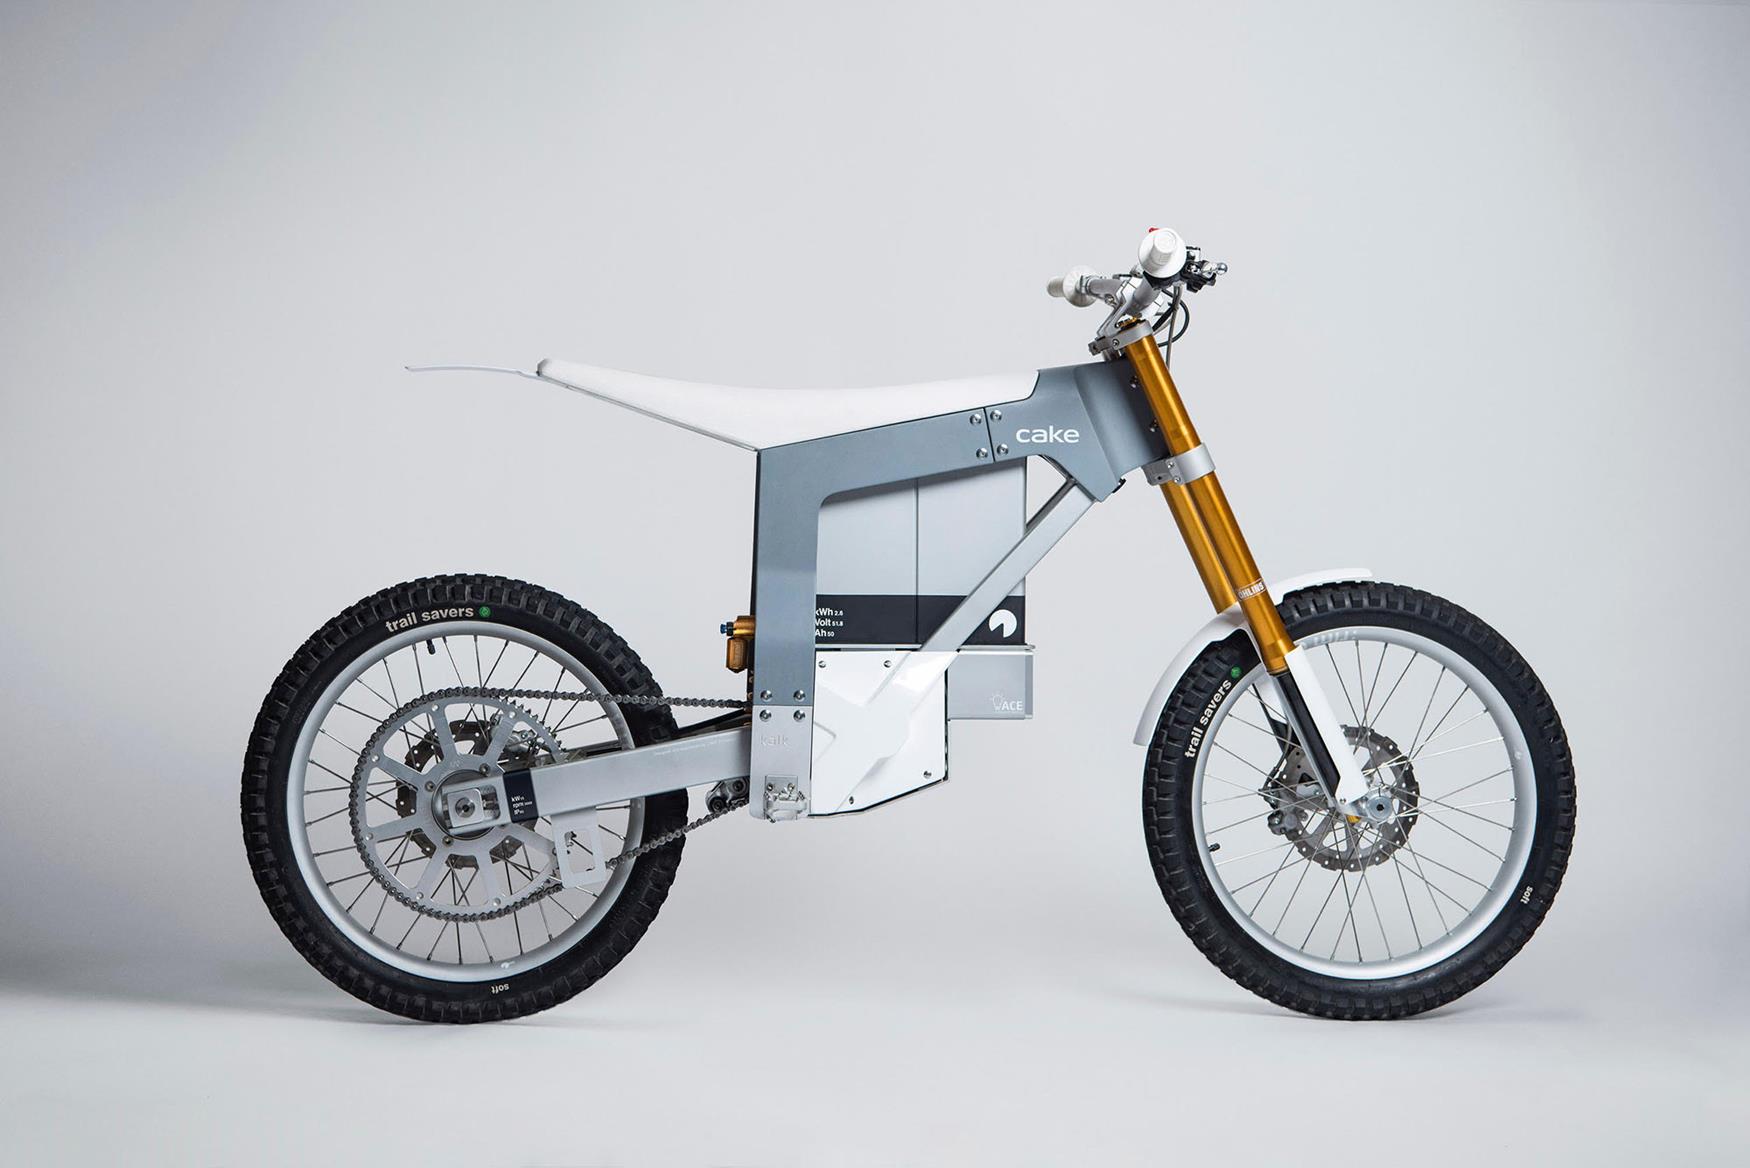 Cake Launch First Road Legal Electric Motorbike Mcn